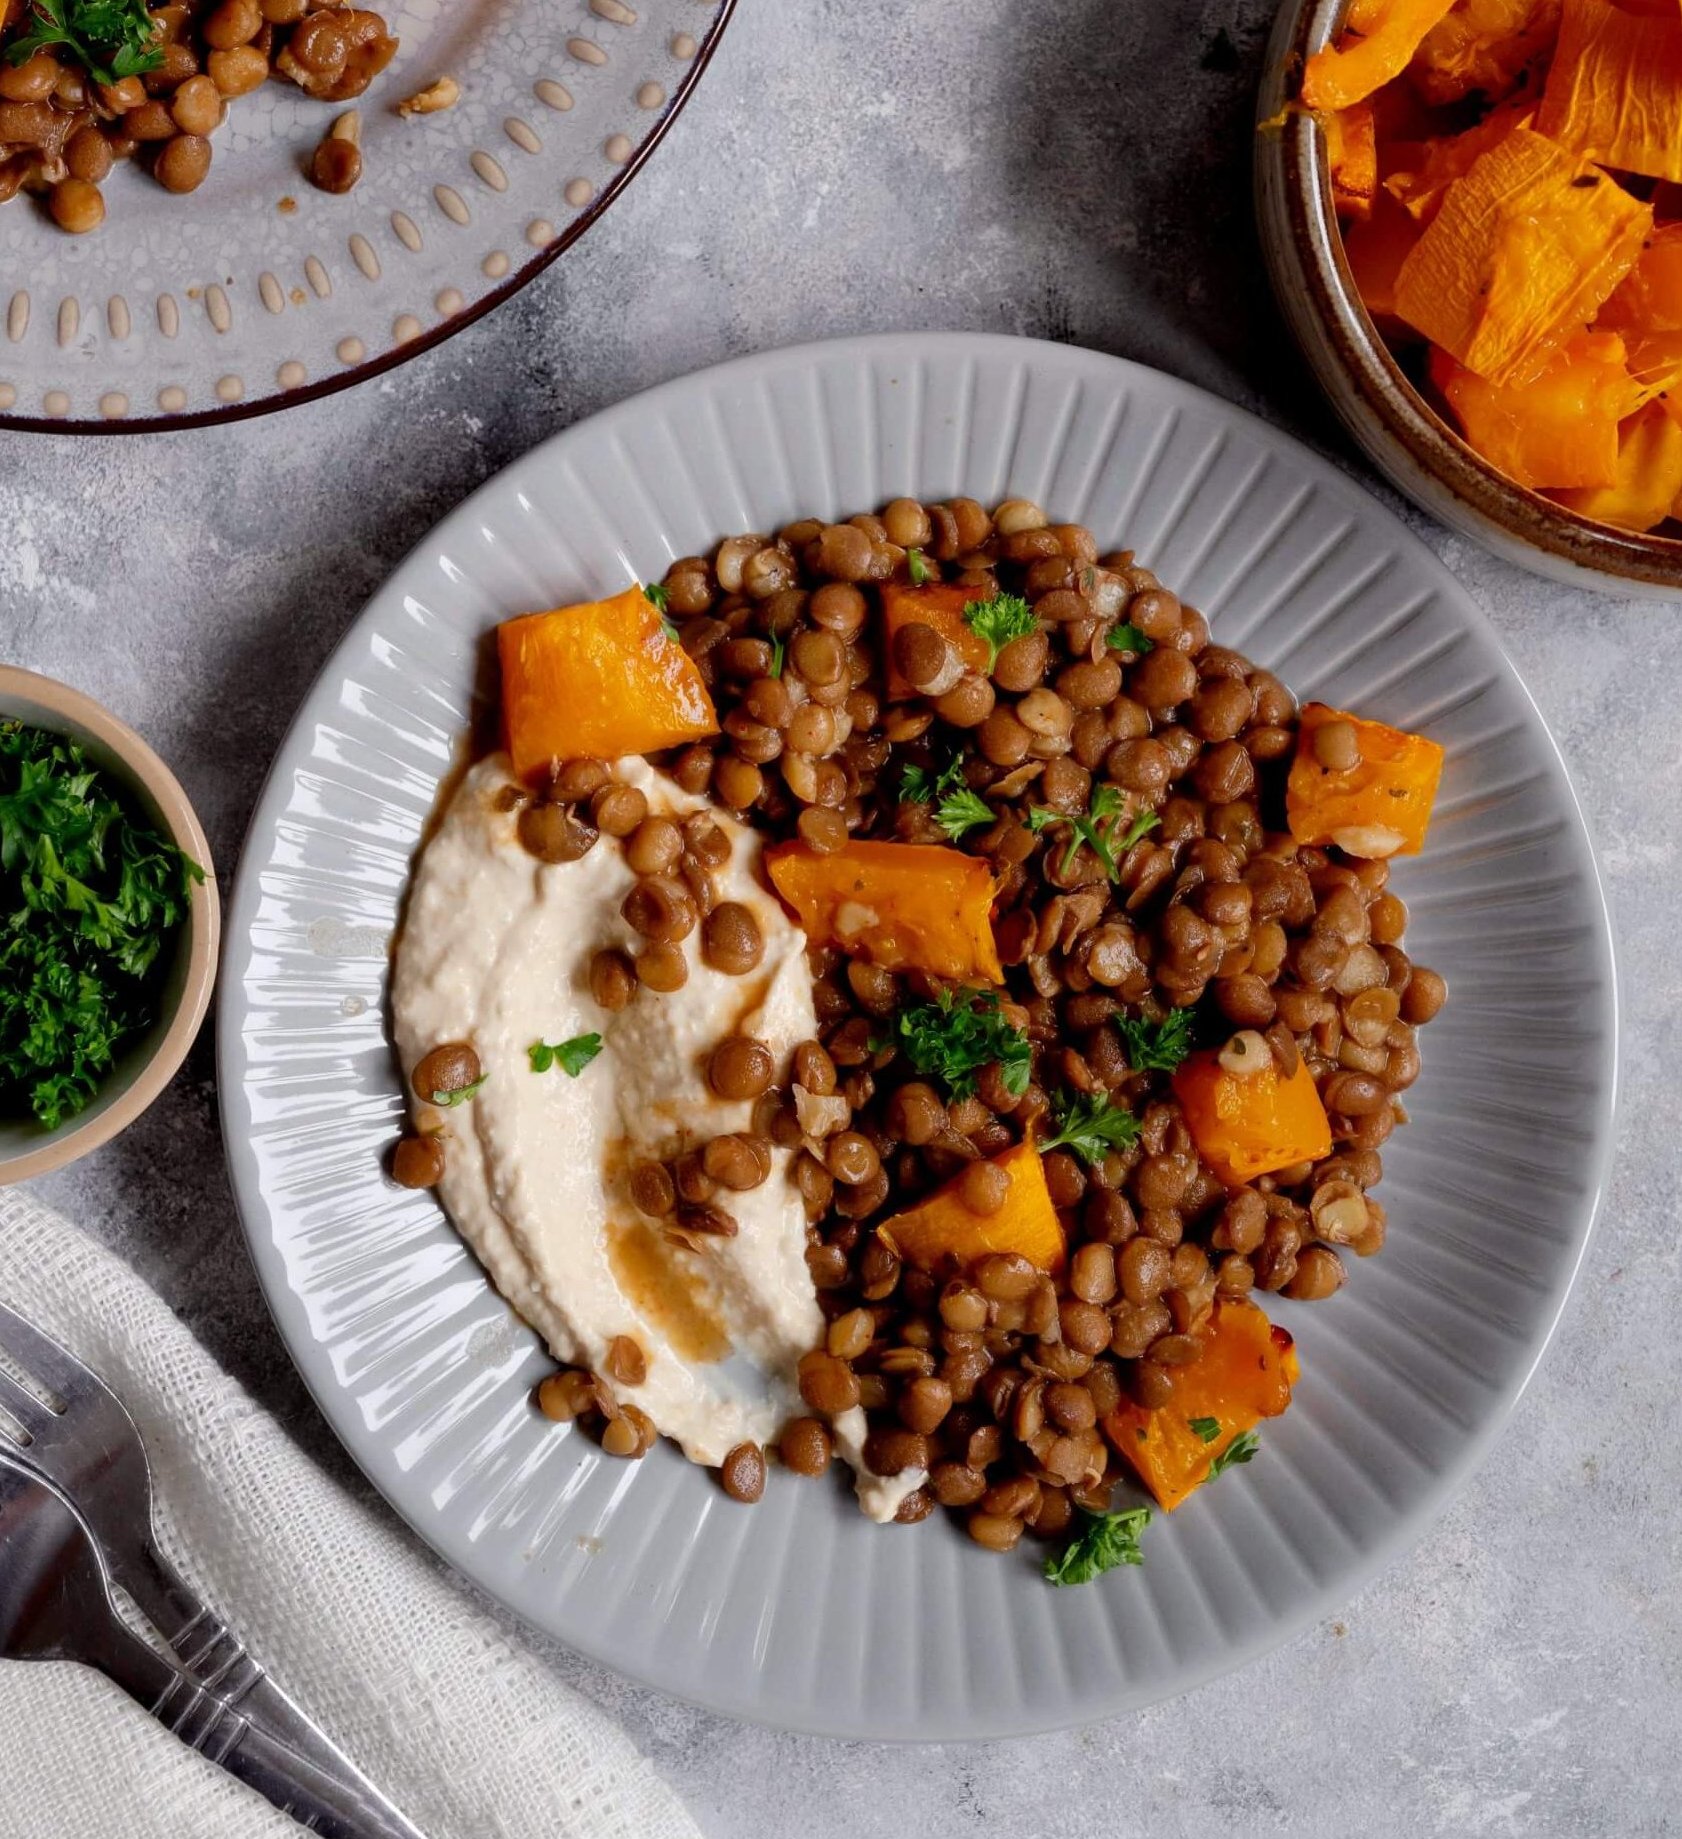 Red rice, lentils and butternut squash with carrot and quinoa in a herby dressing, healthy clean eating concept